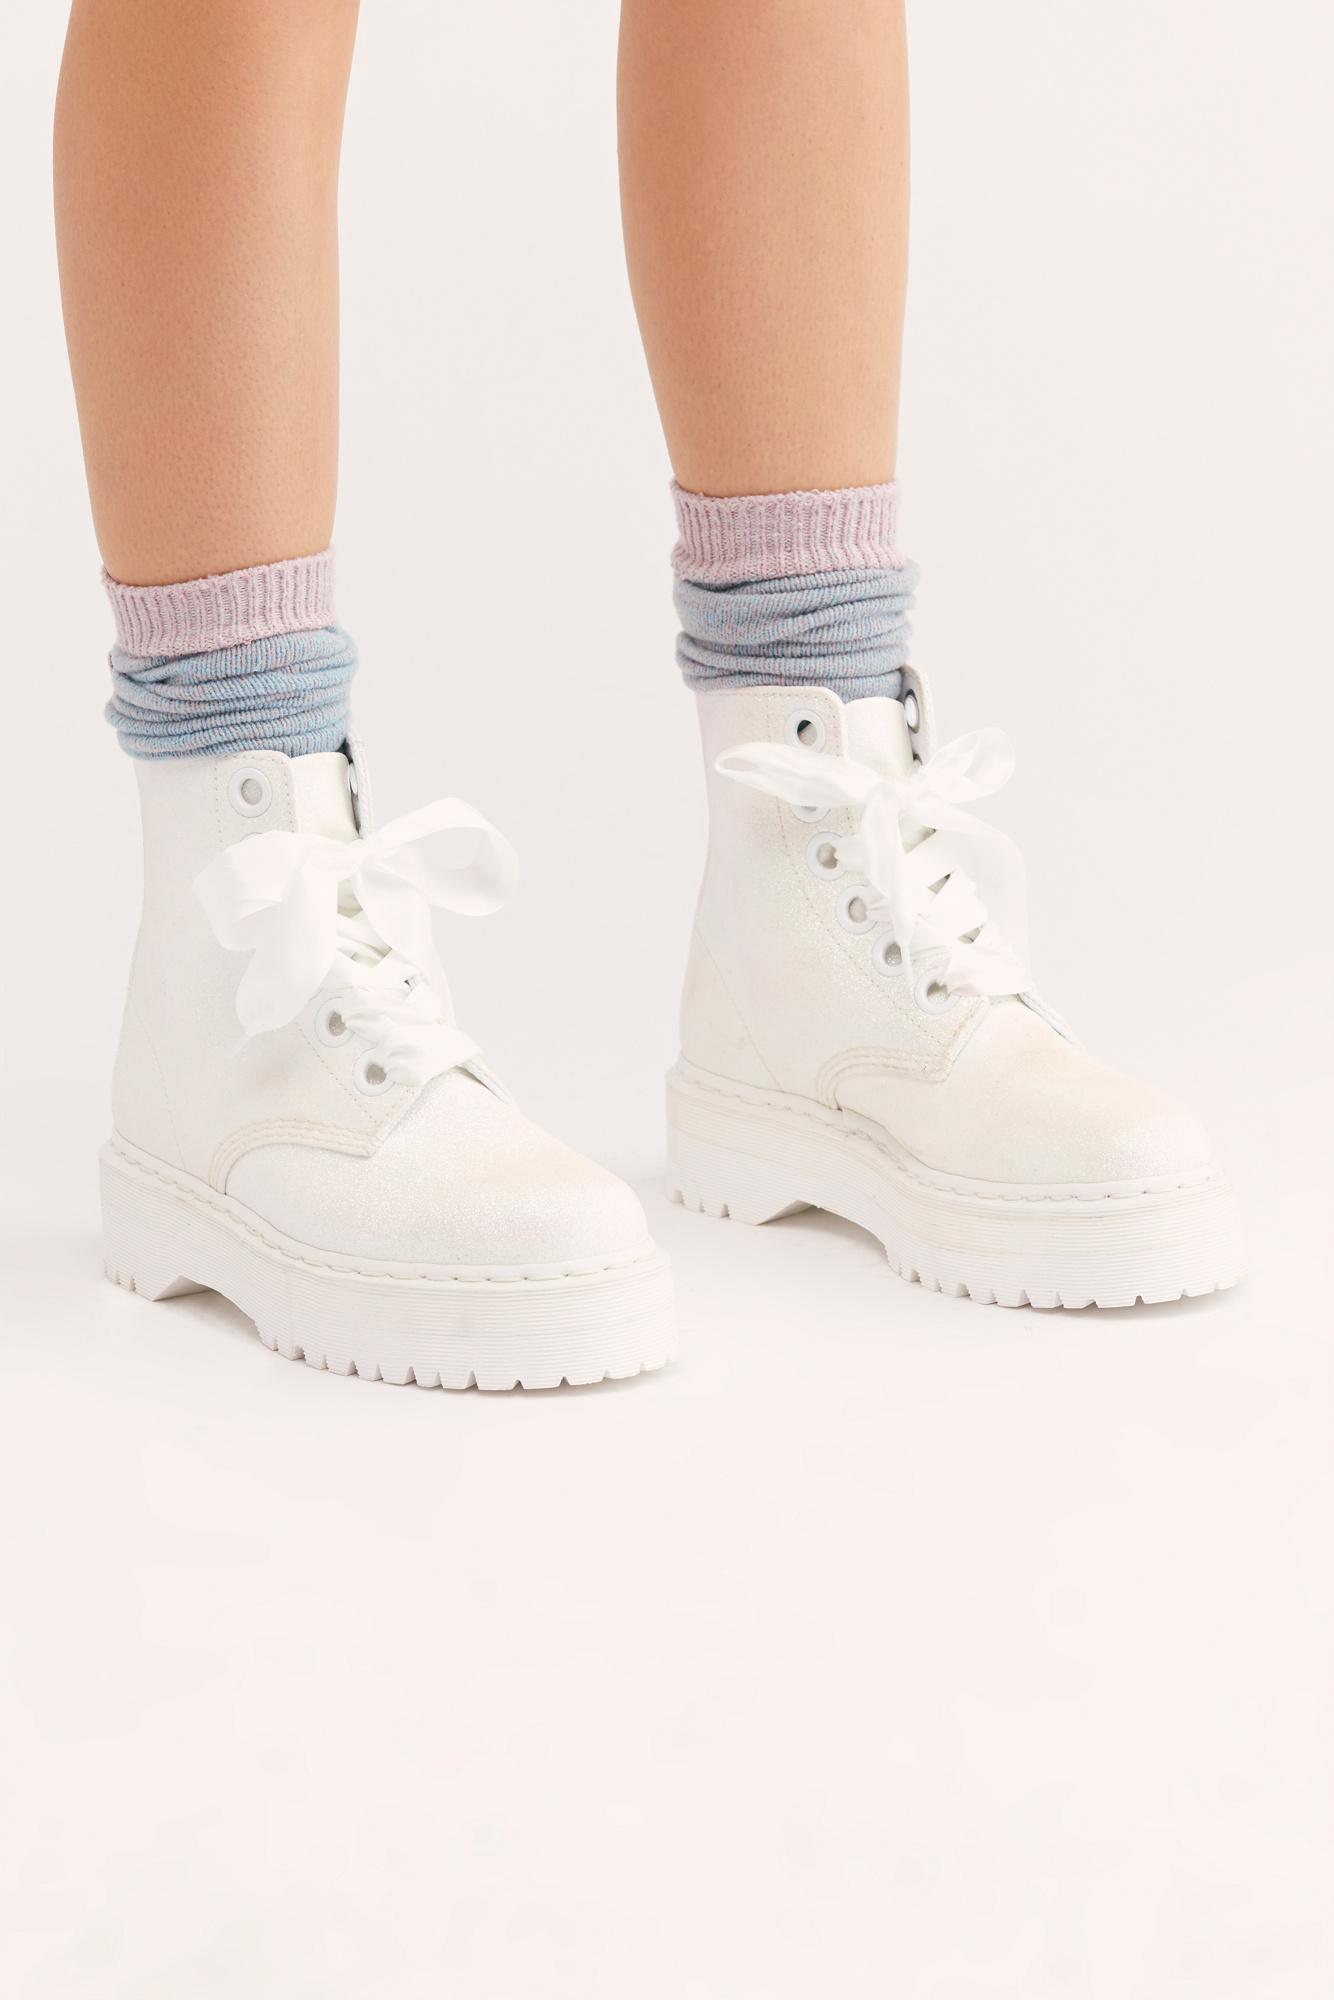 Free People Lace Dr. Martens Molly Glitter 6 Eye Boots in White - Lyst